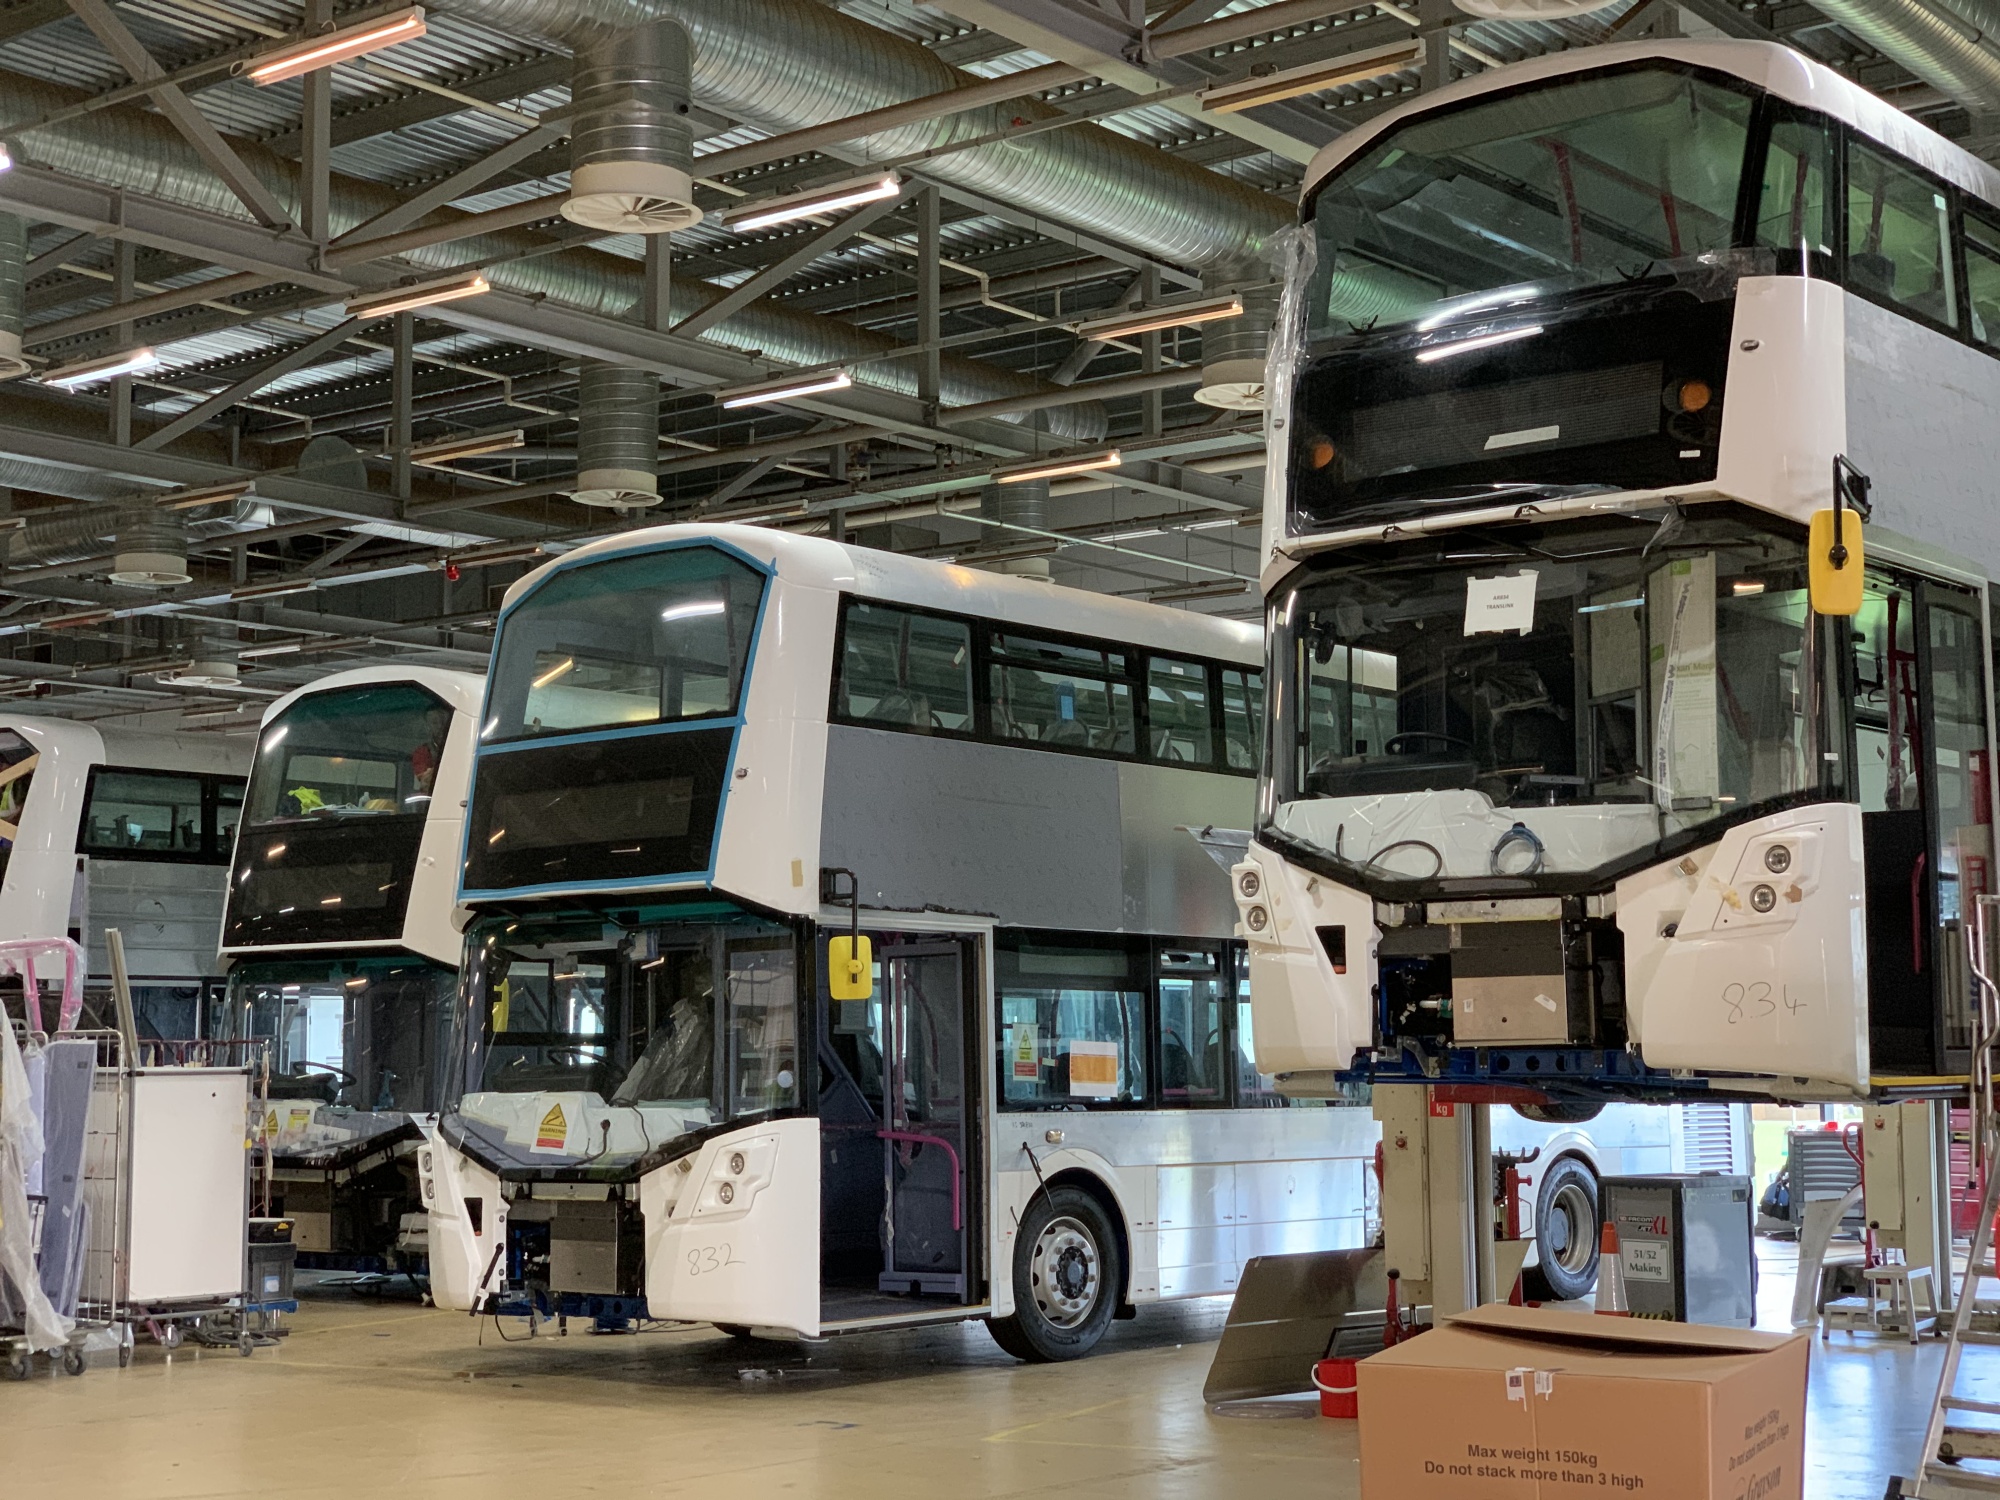 Wrightbus hydrogen buses on the production line